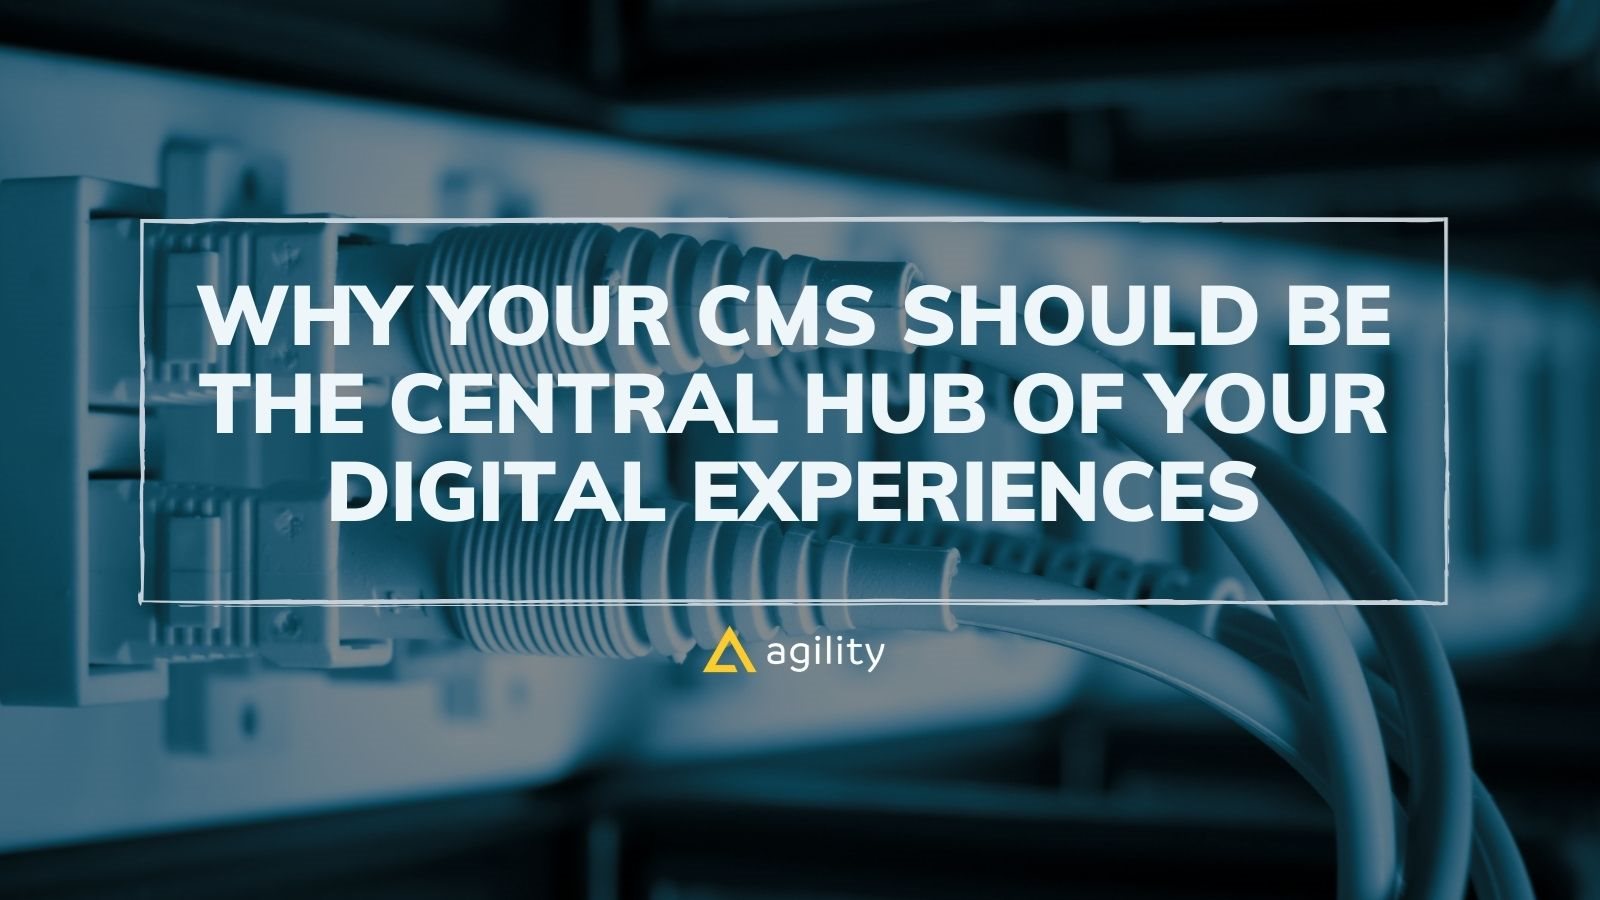 Why Your CMS Should Be the Central Hub